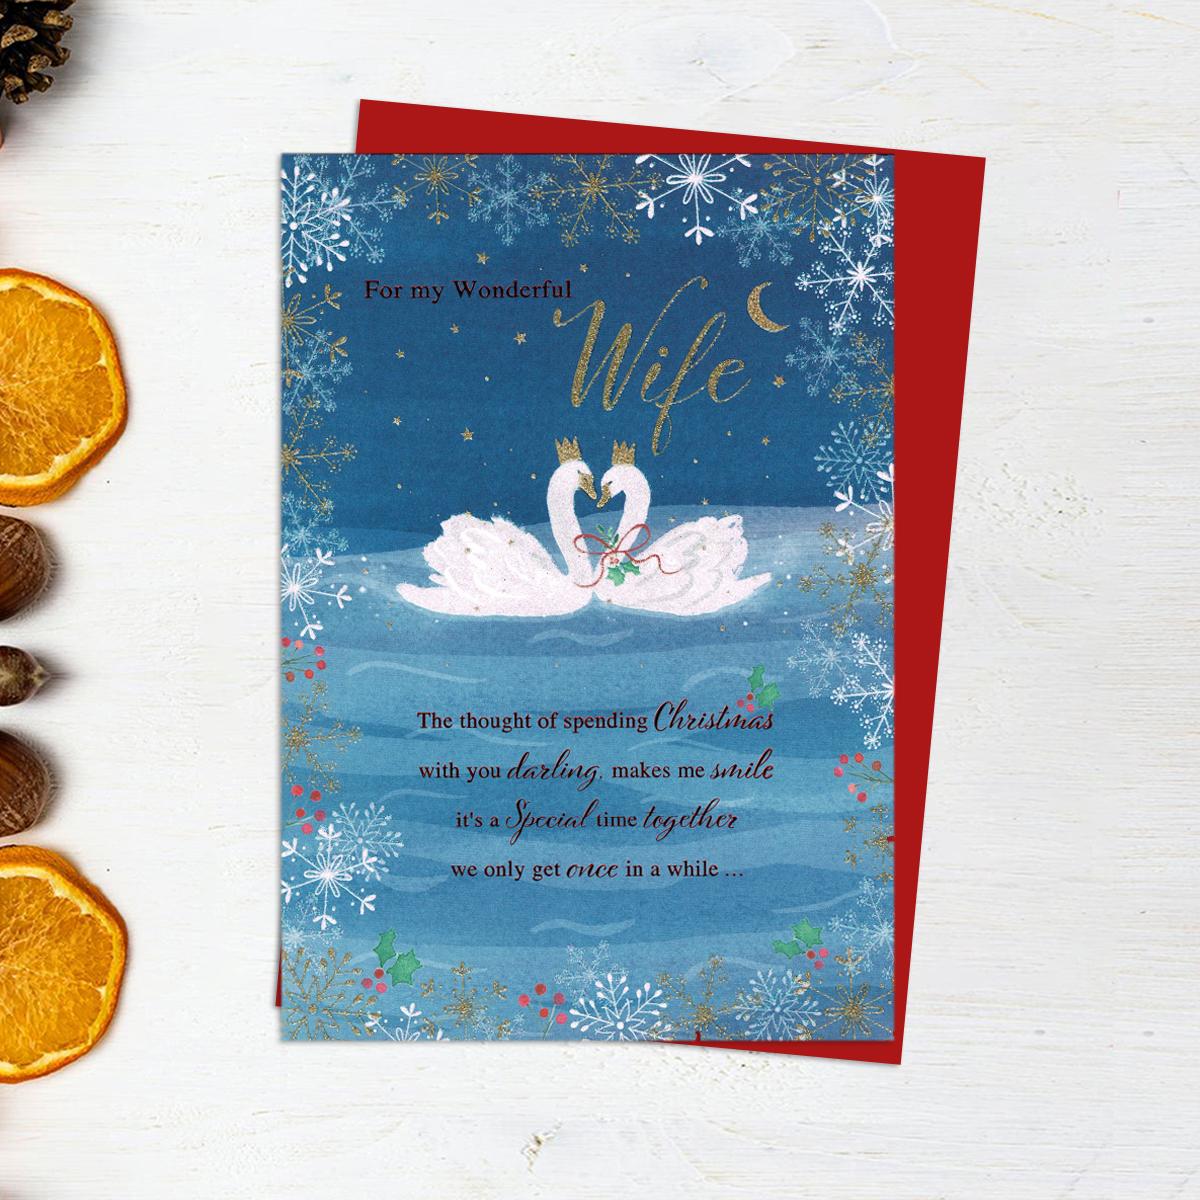 For My Wonderful Wife Featuring Verse And Two Christmas Swans. Finished With Red And Gold Foiling Detail And Sparkle. A Red Envelope Completes the Design!